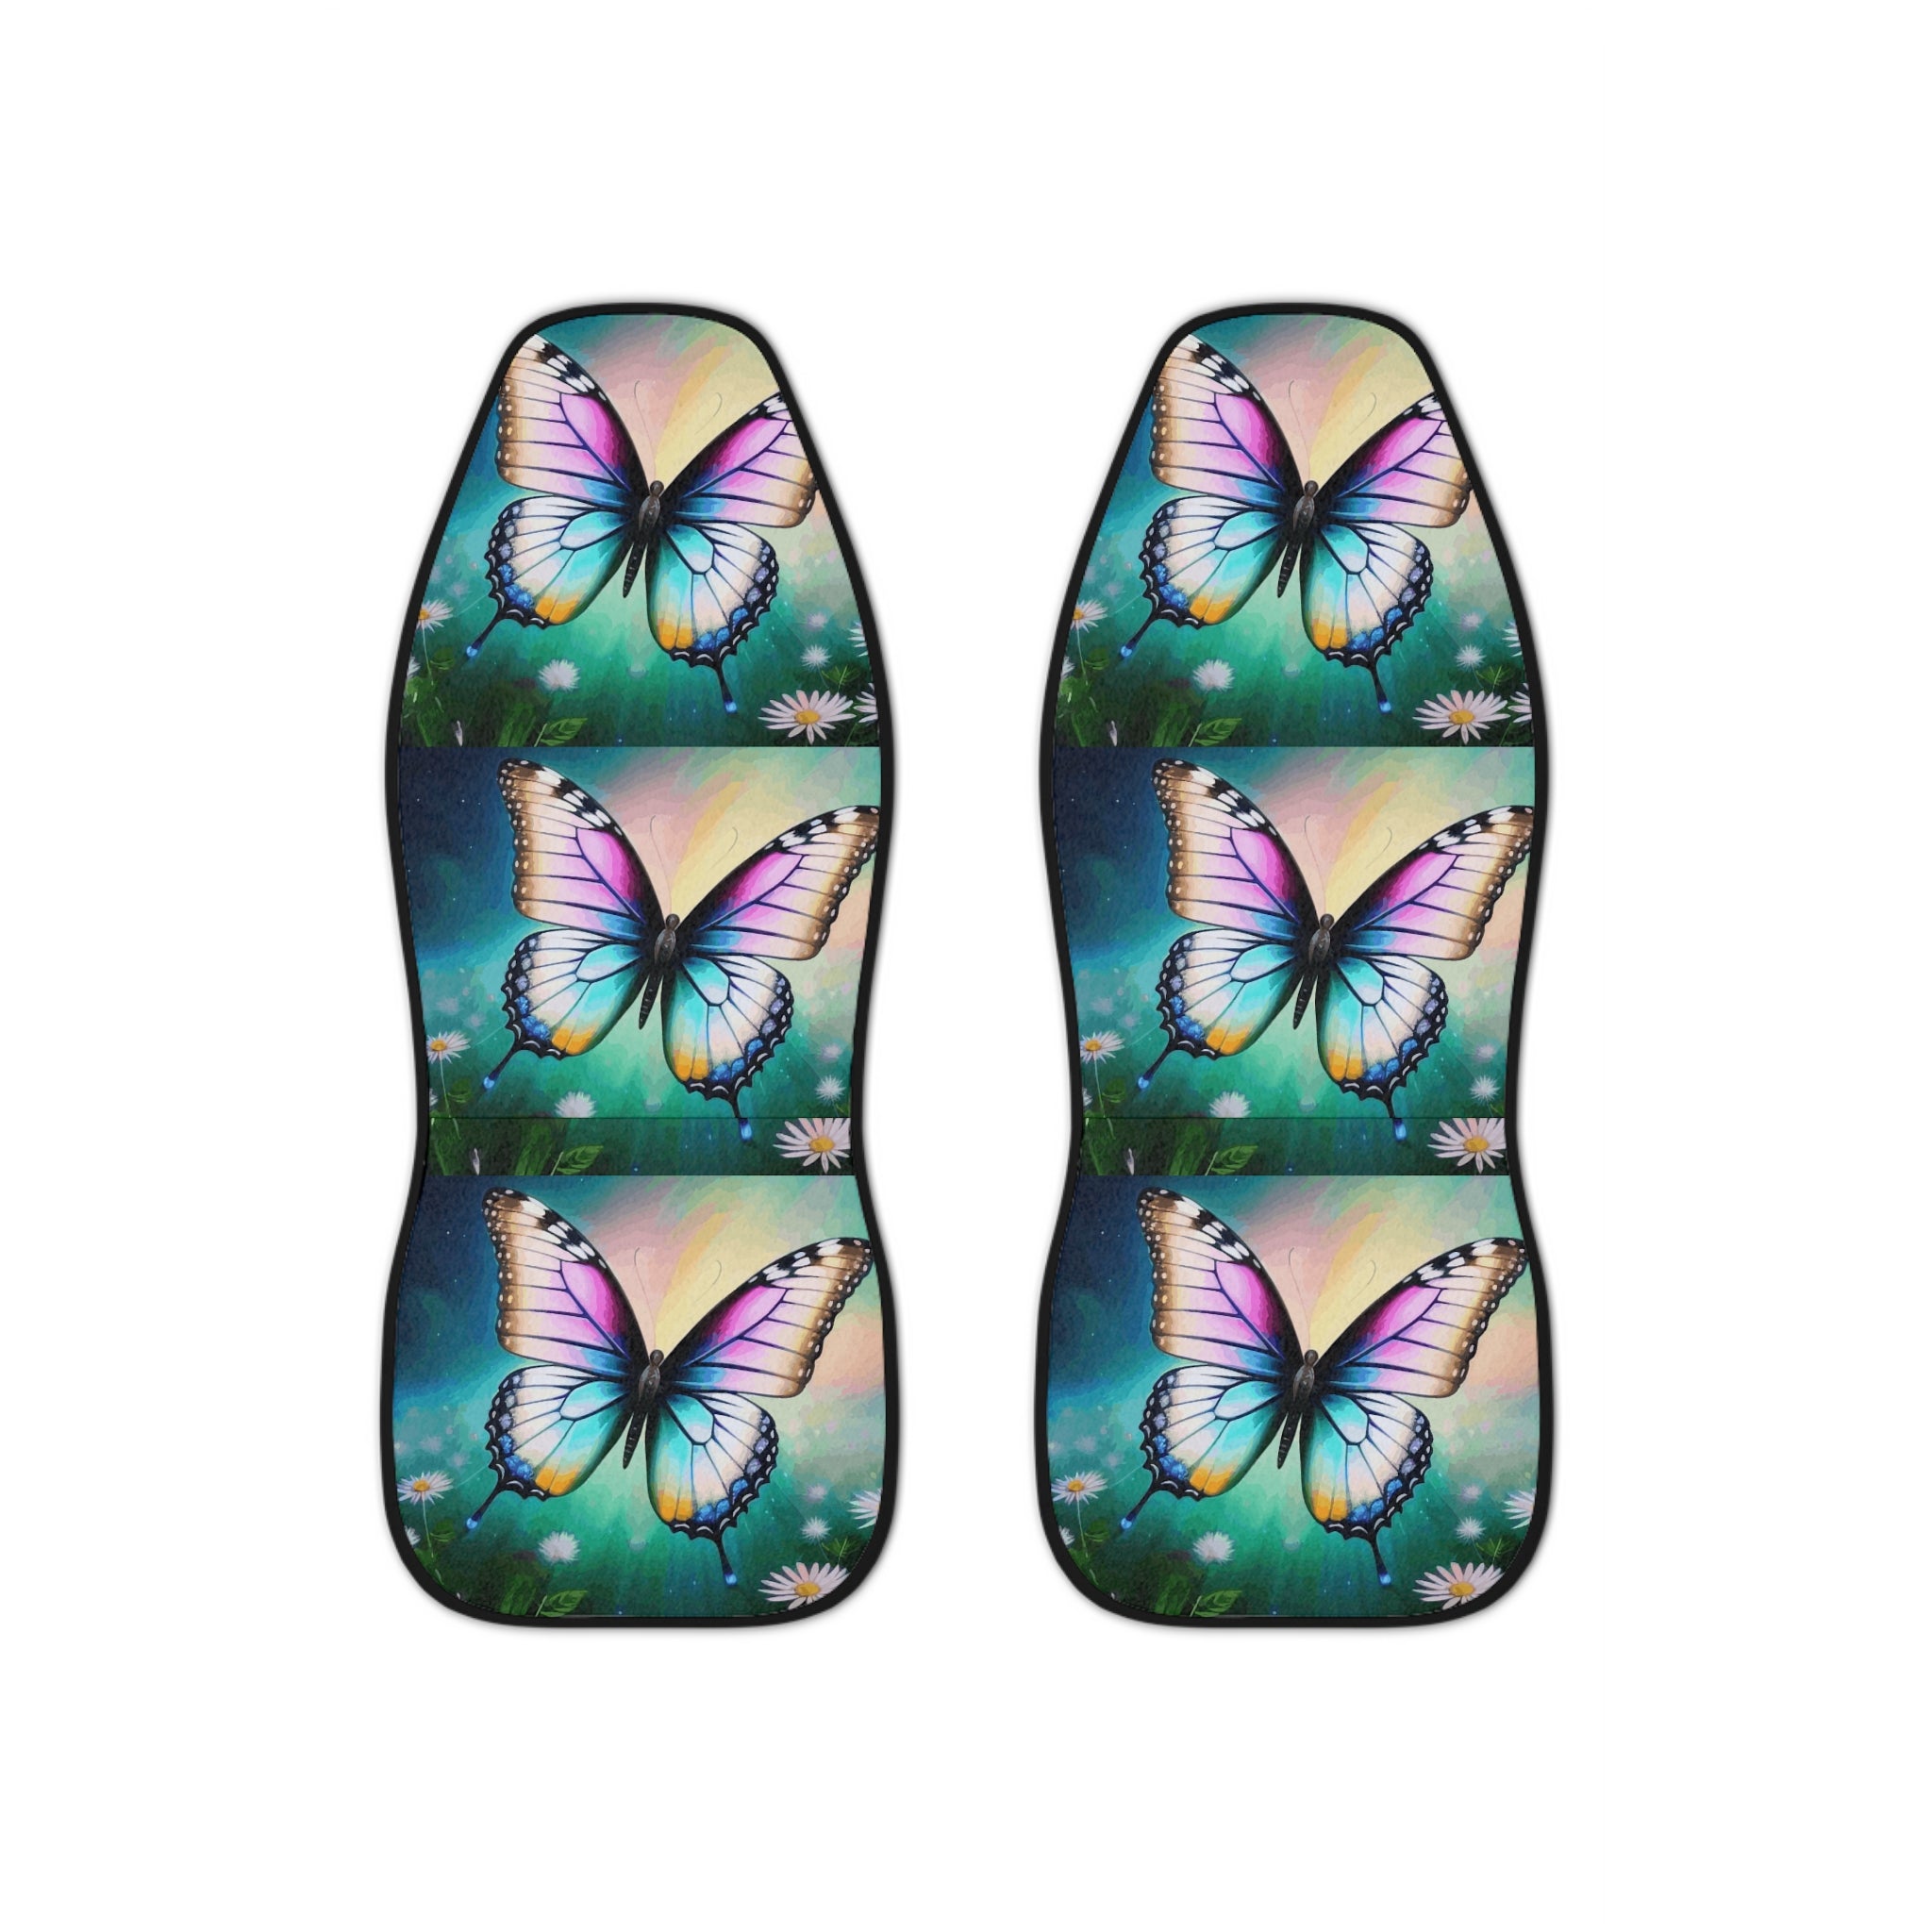 Beautiful Butterfly and Daisies Car Seat Covers